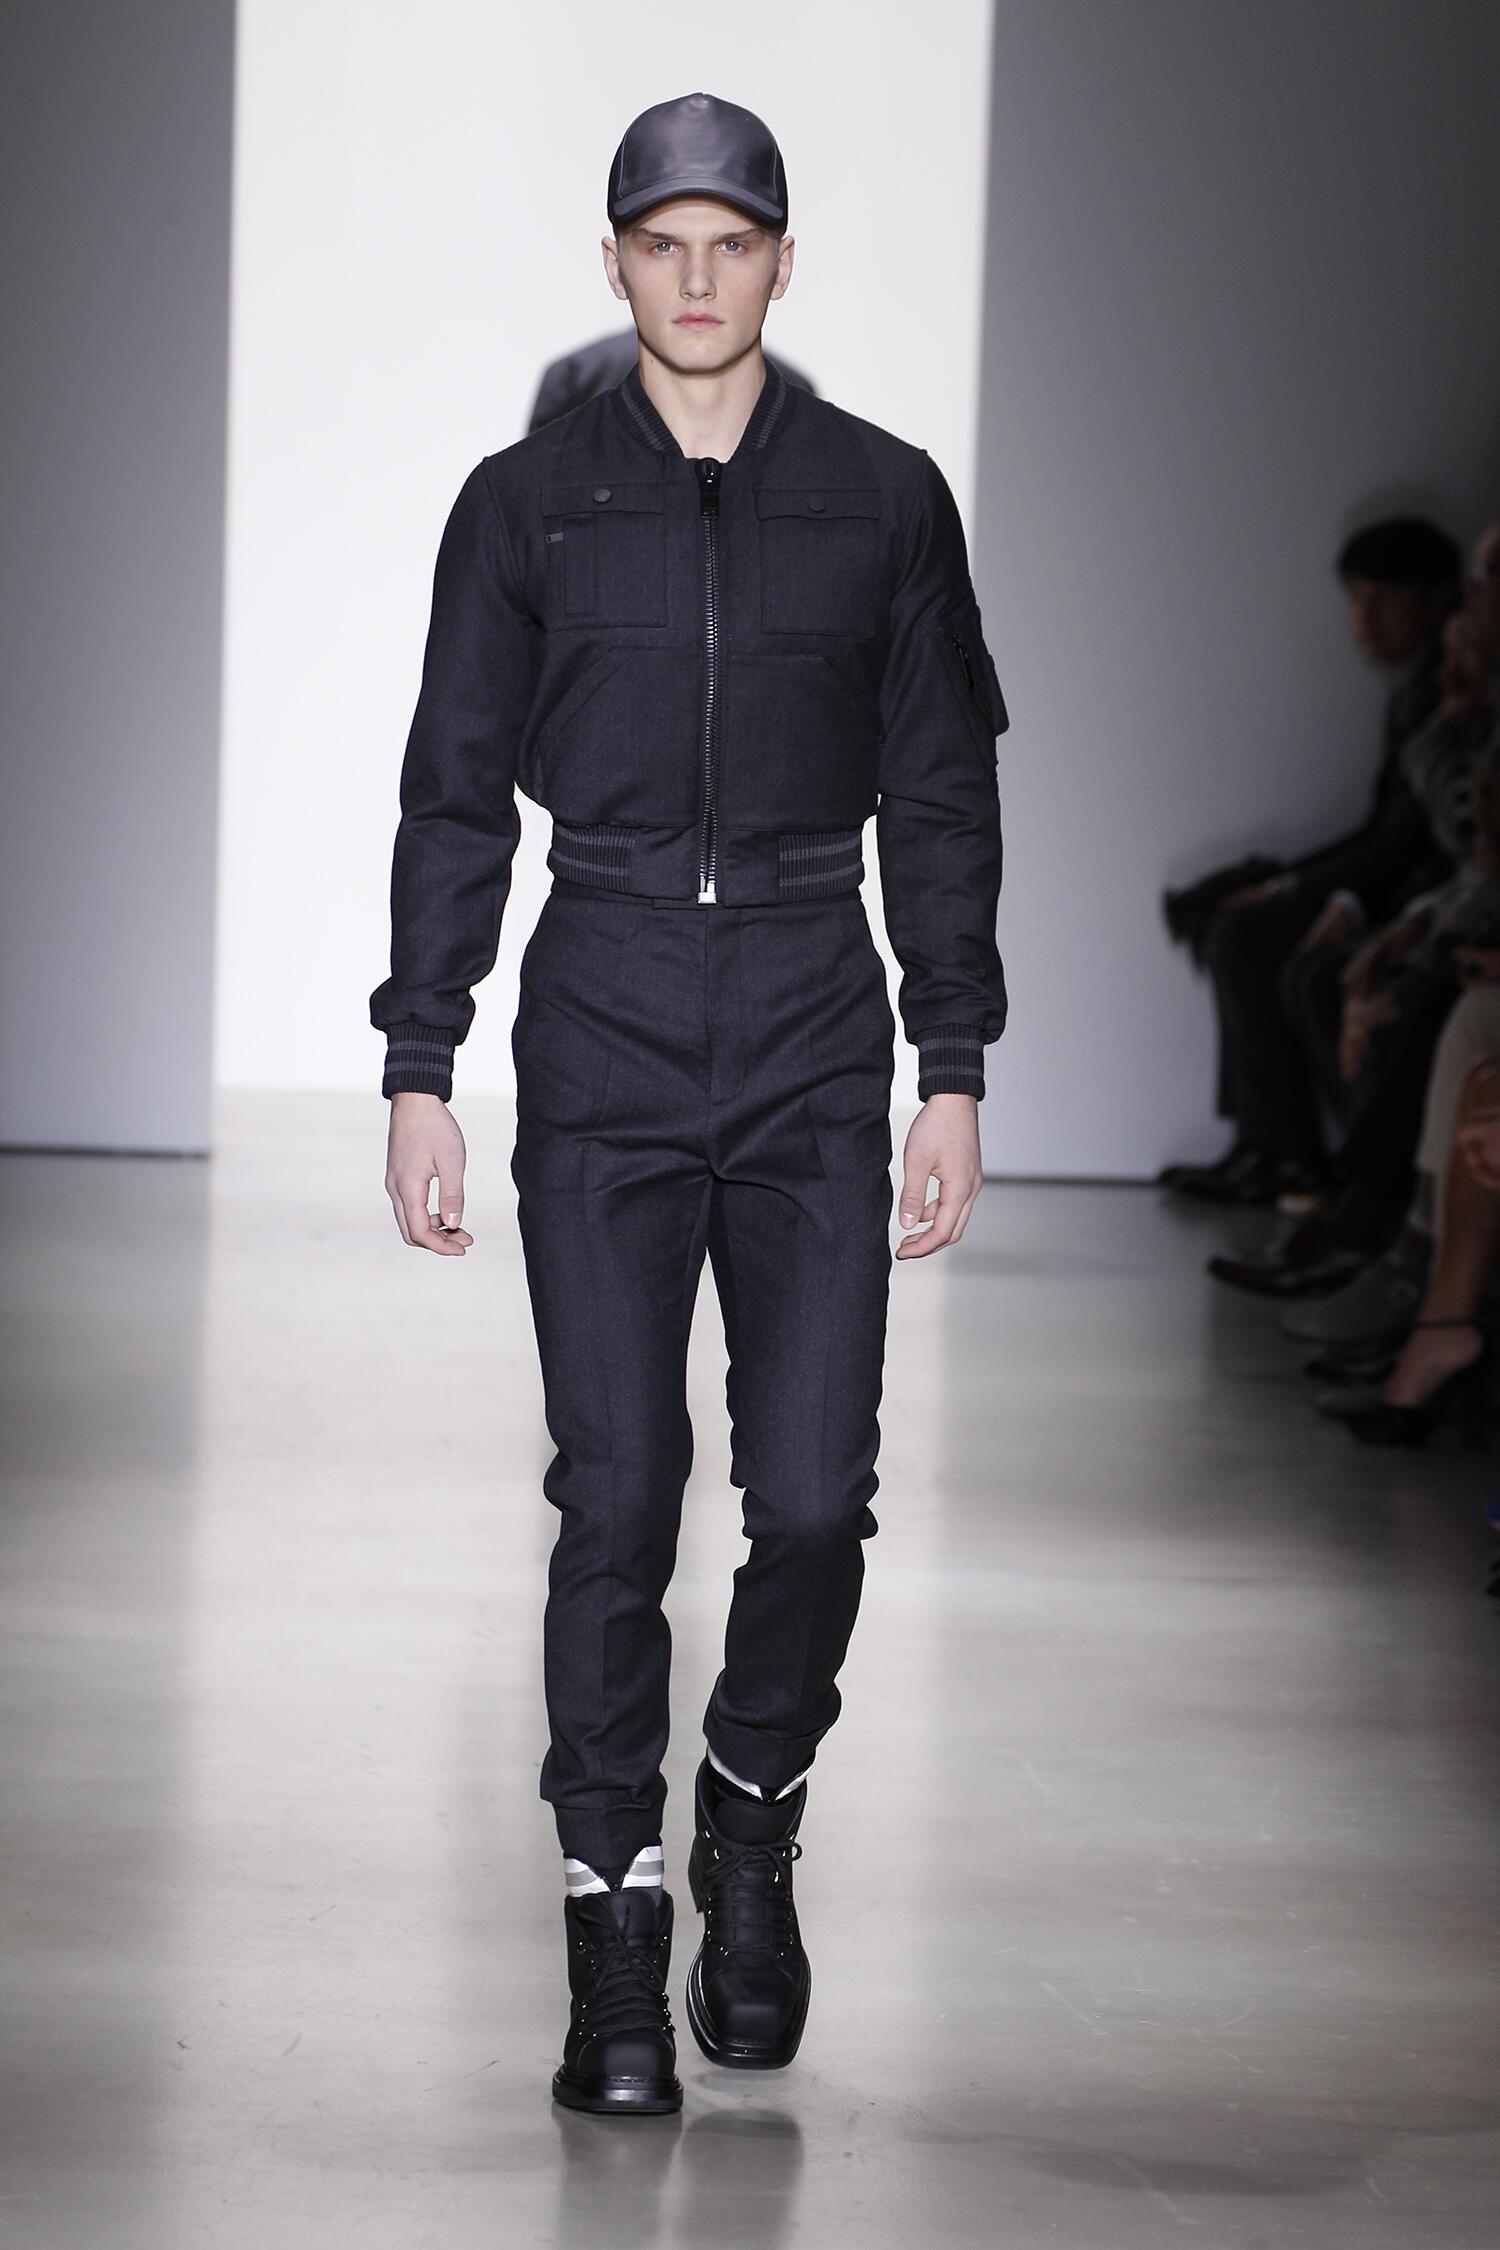 CALVIN KLEIN COLLECTION MEN’S FALL 2015 | The Skinny Beep